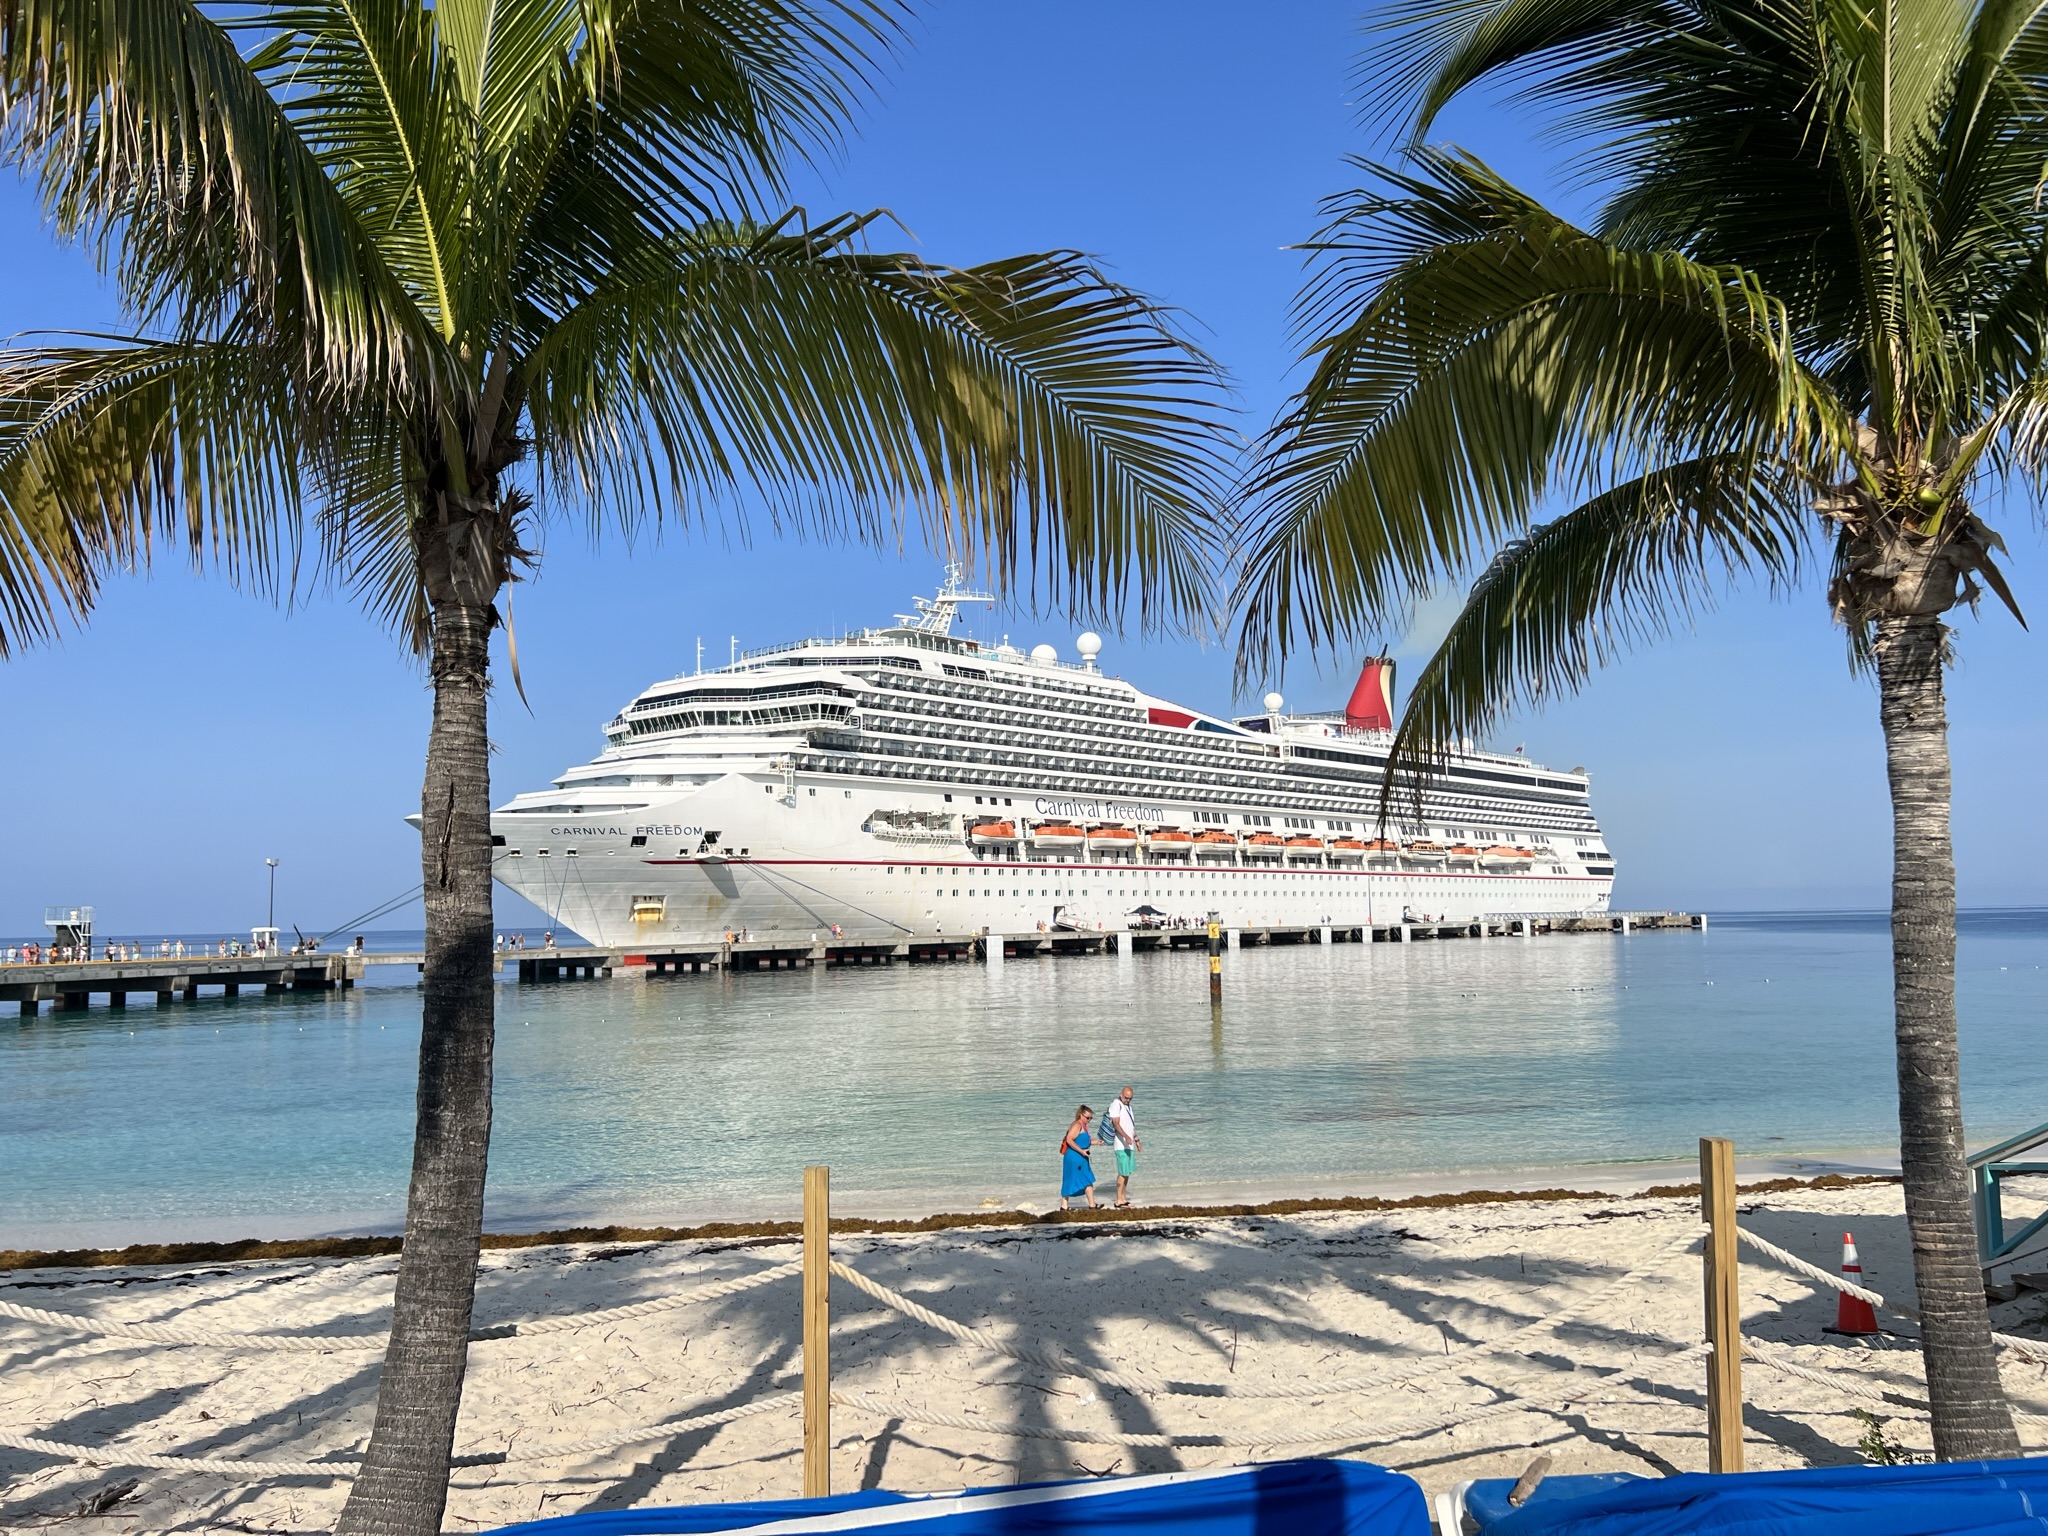 Cruise Shore Excursions - Grand Turk Cruise Center on Grand Turk Island in the Turks and Caicos